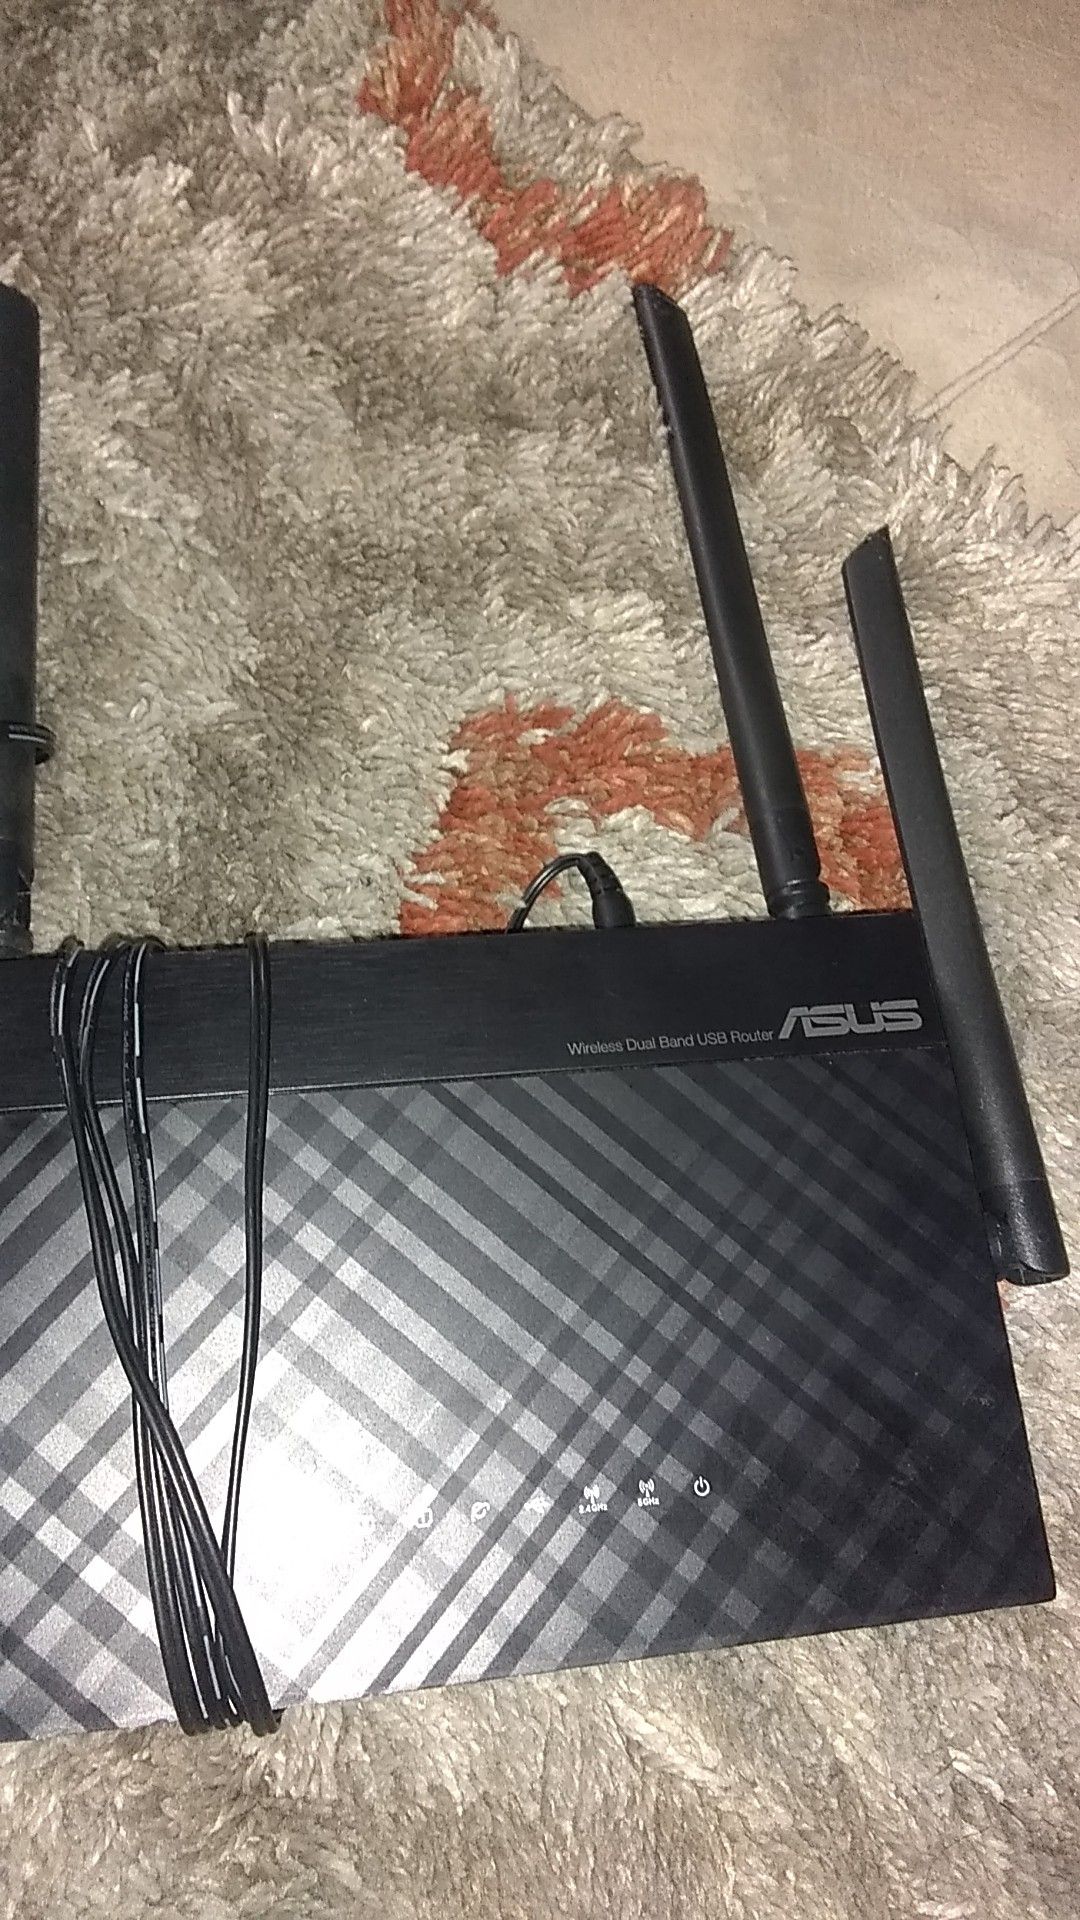 ASUS wireless Dual Band Router. Model: RT-AC1200